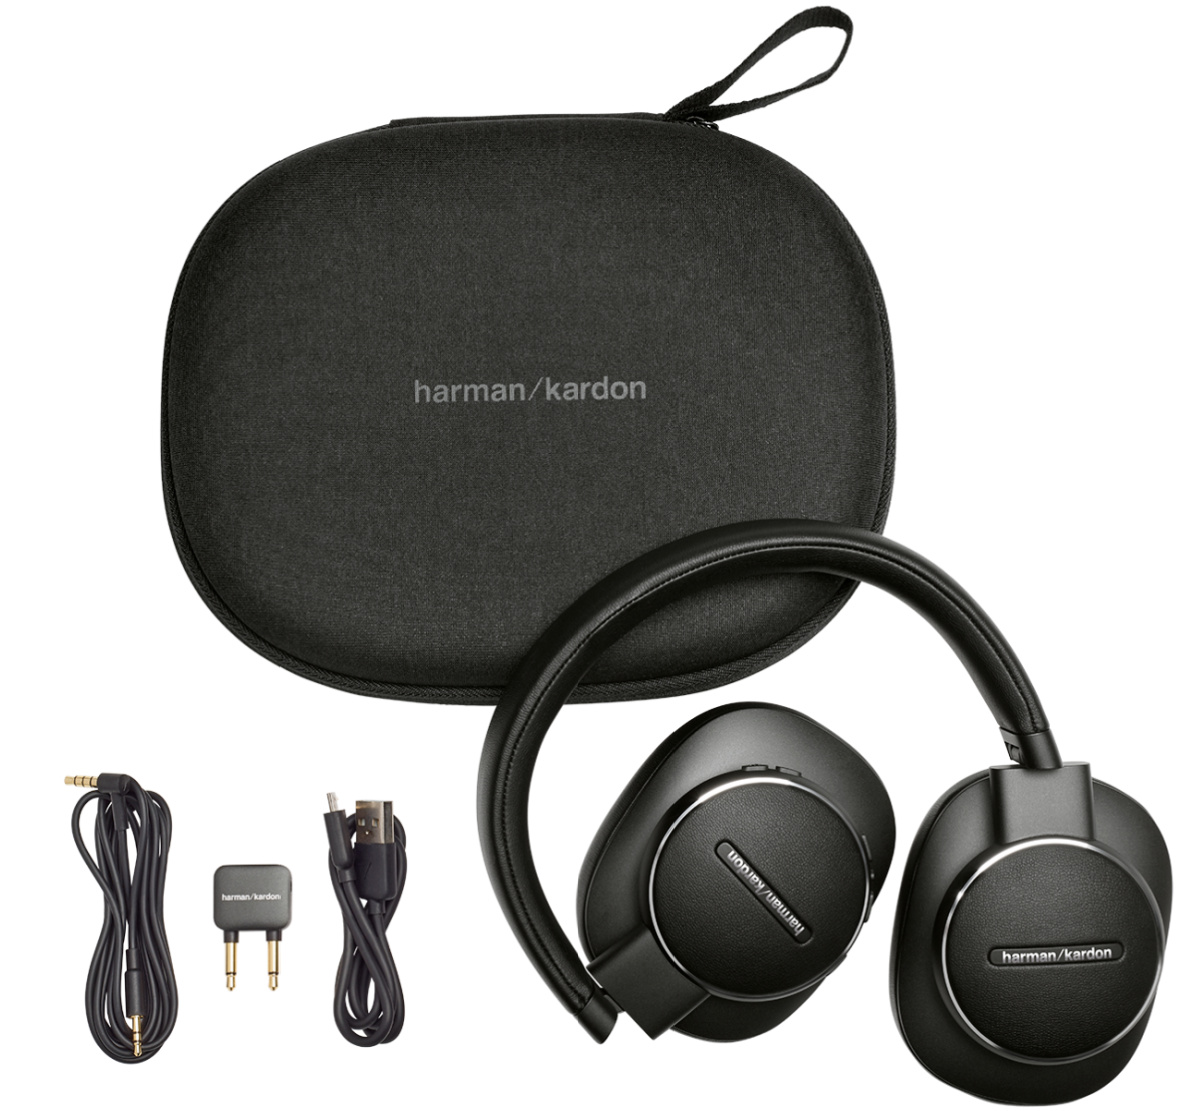 black headphones, carrying case, and accessories